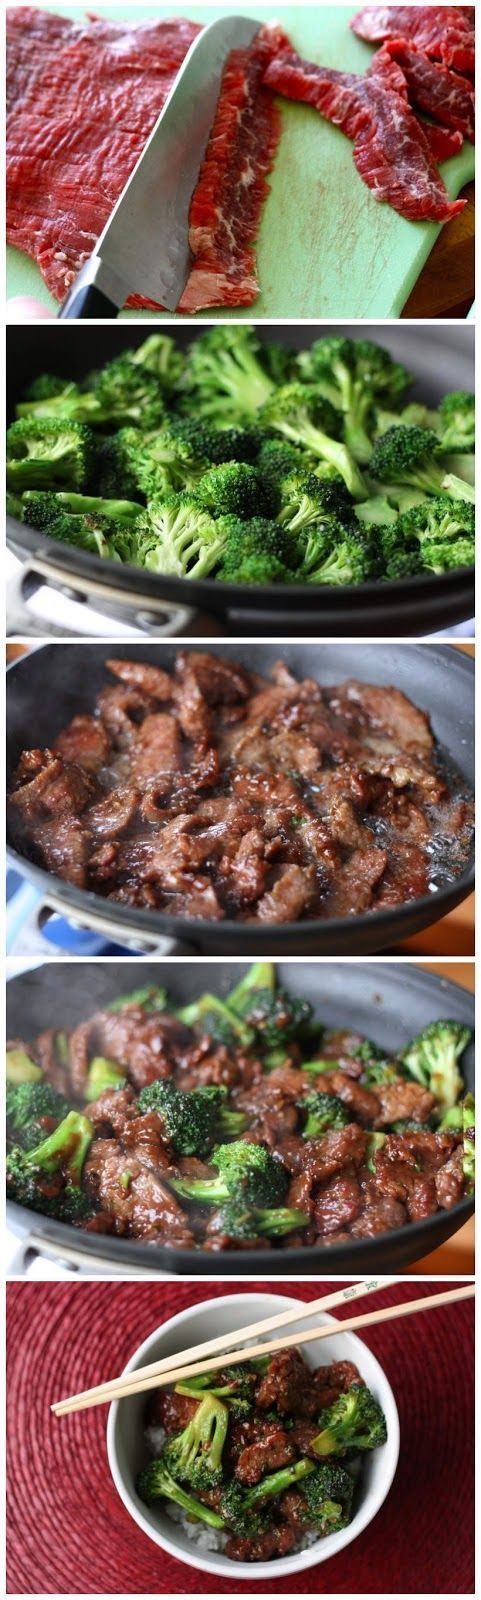 Beef with broccoli, weeknight meals, easy meals, stir fry #chinese_beef_recipes